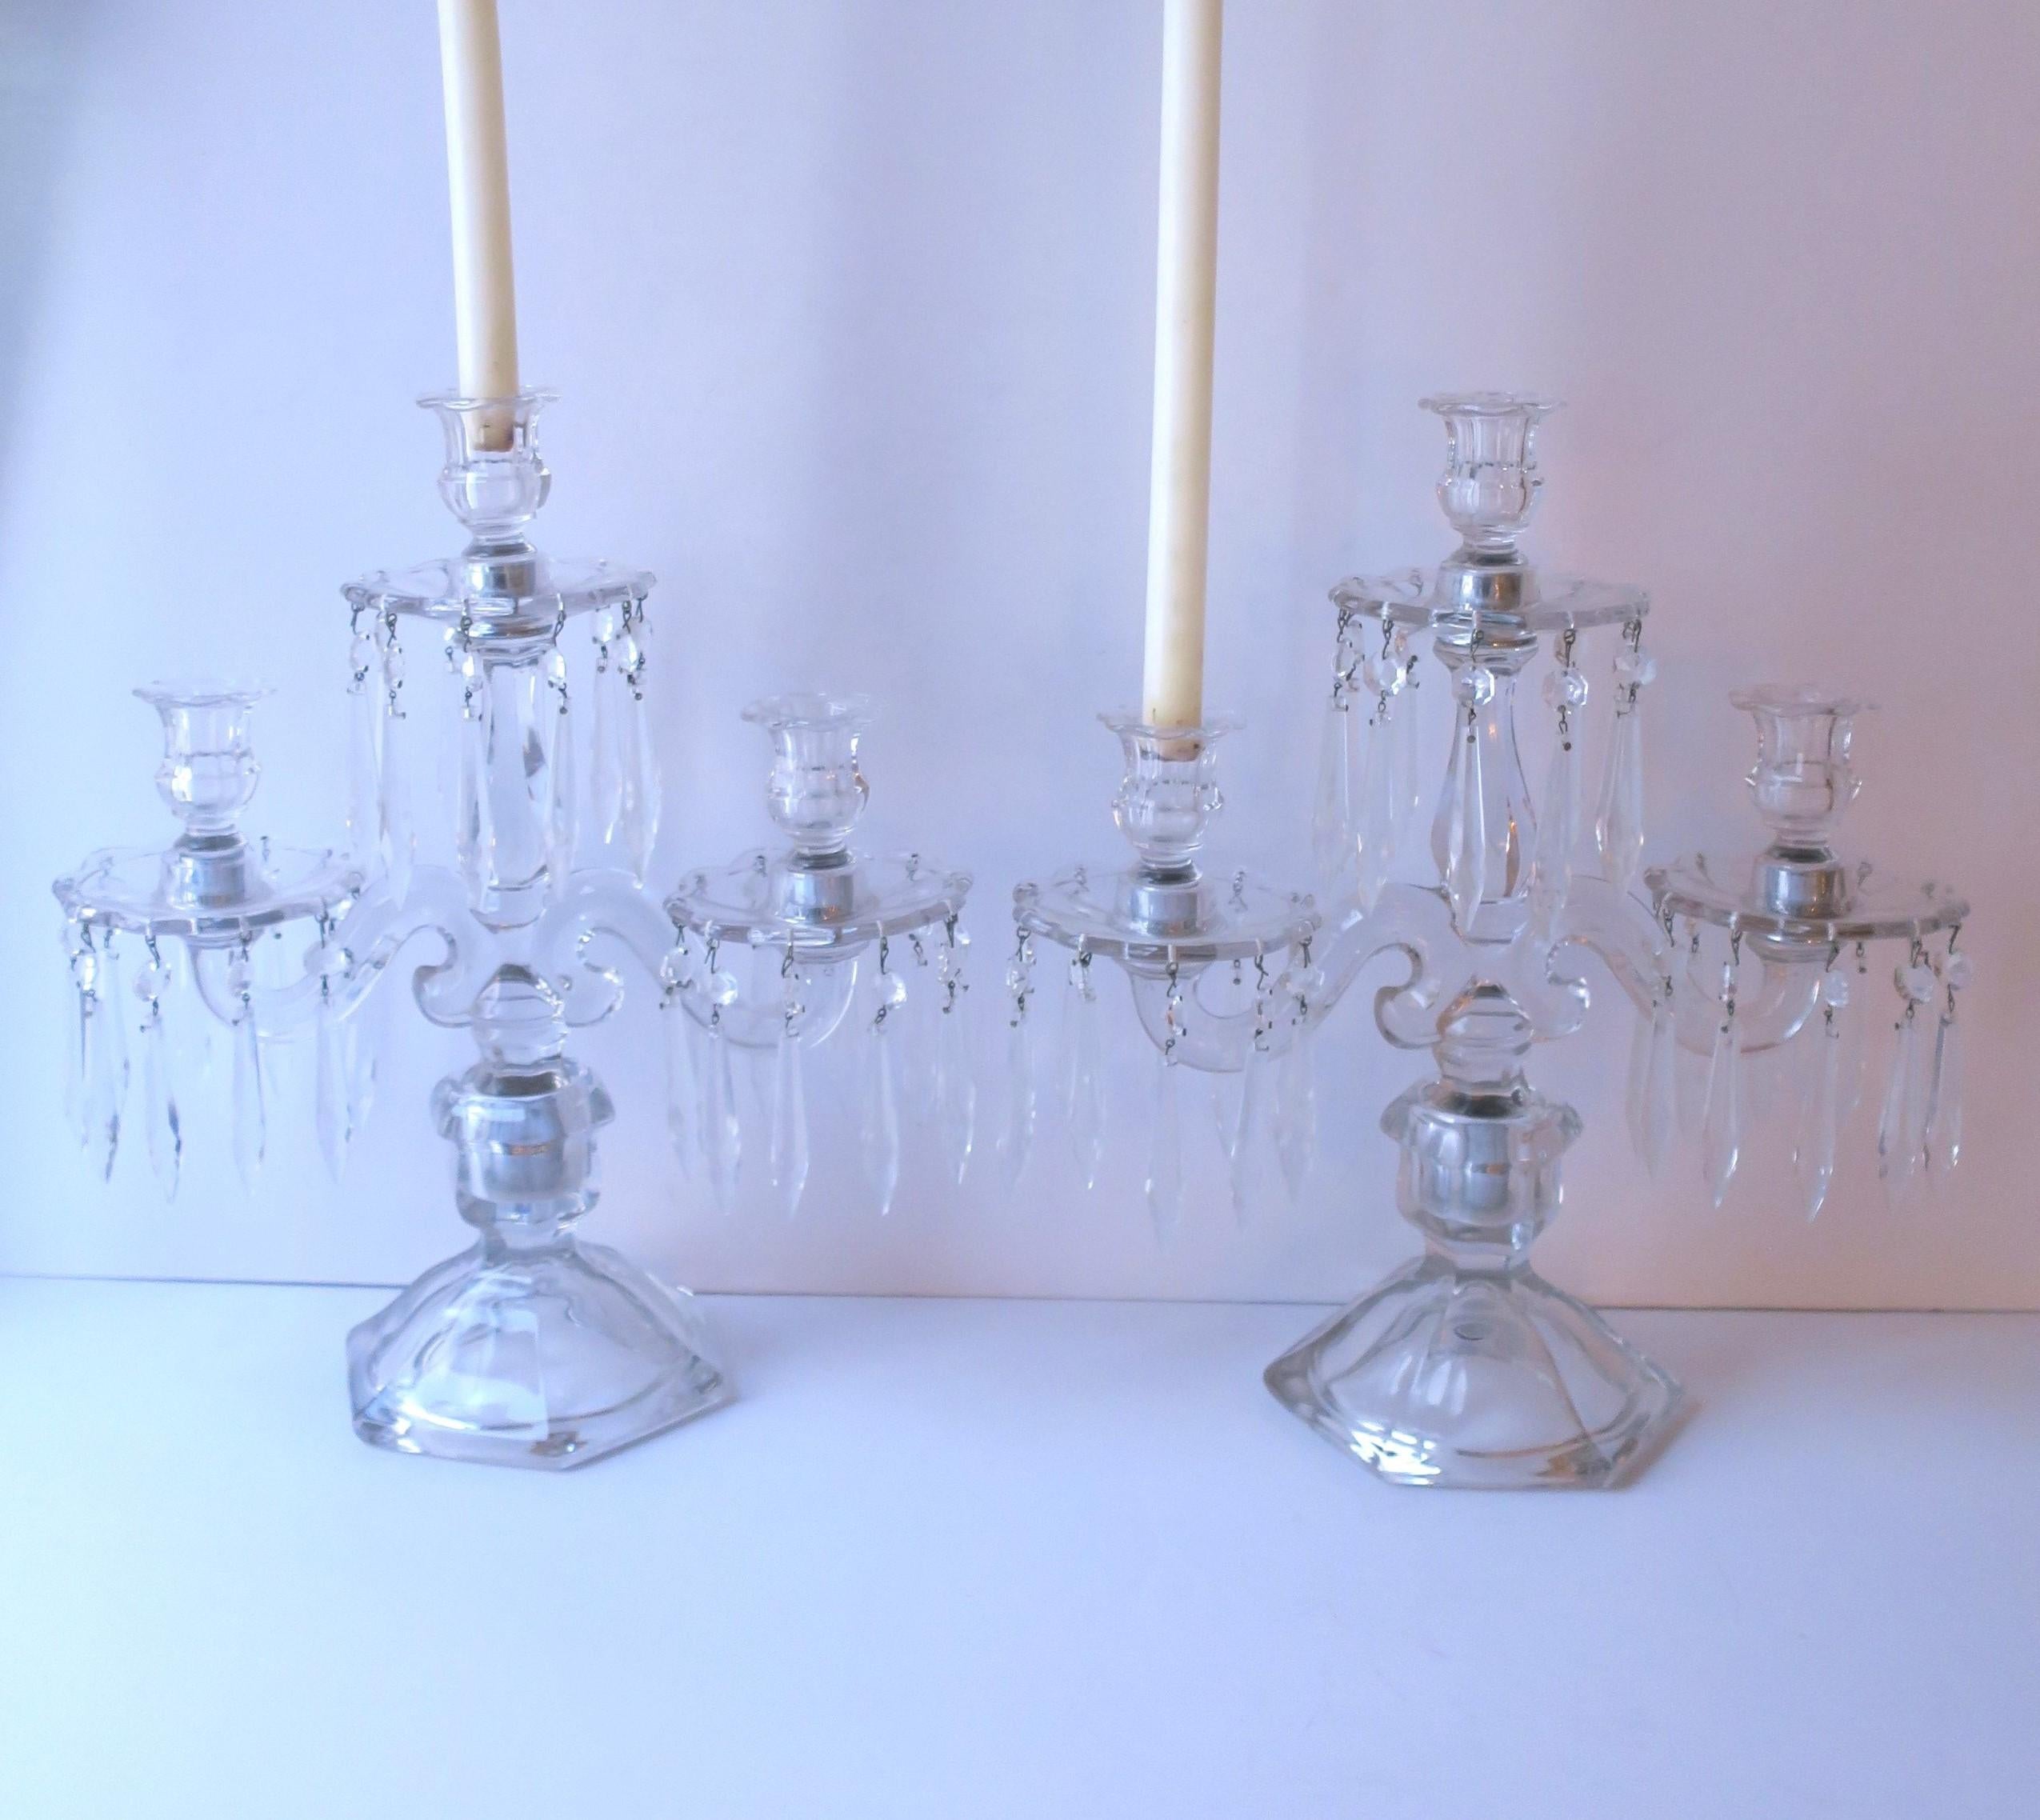 Crystal and Glass Candlesticks Candelabras, Pair In Excellent Condition For Sale In New York, NY